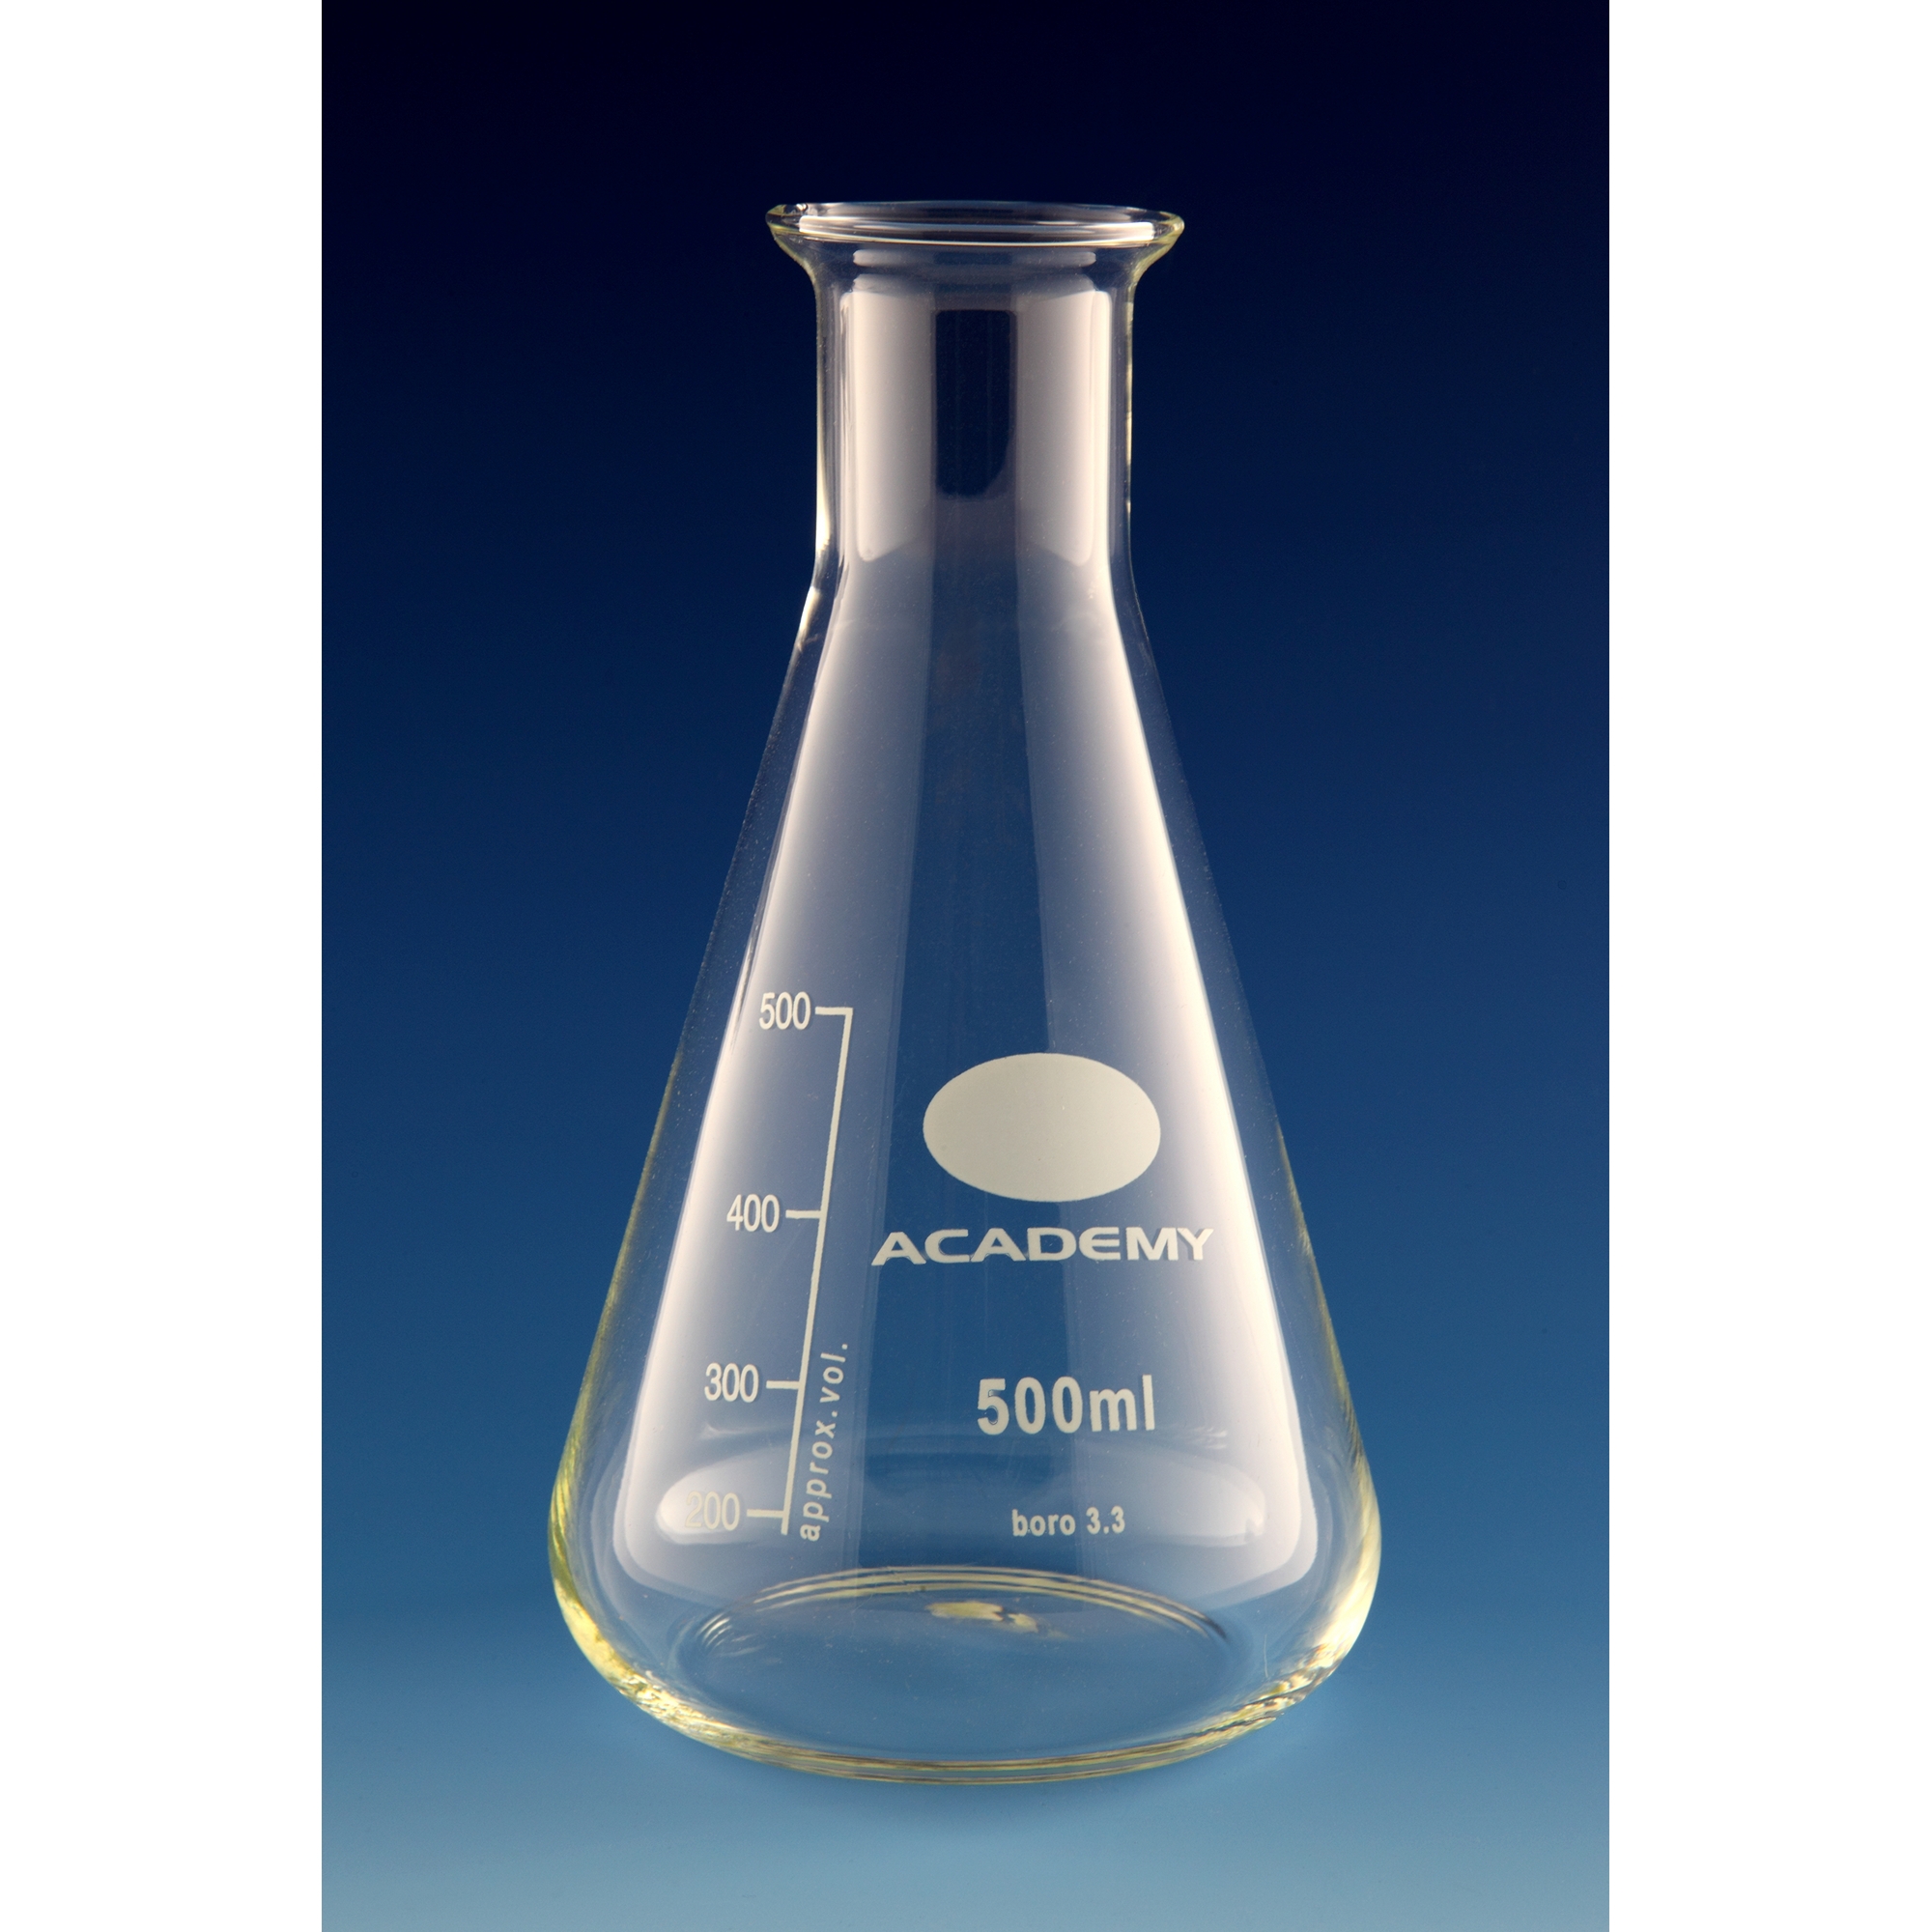 Academy Narrow Mouth Conical Flasks 500ml